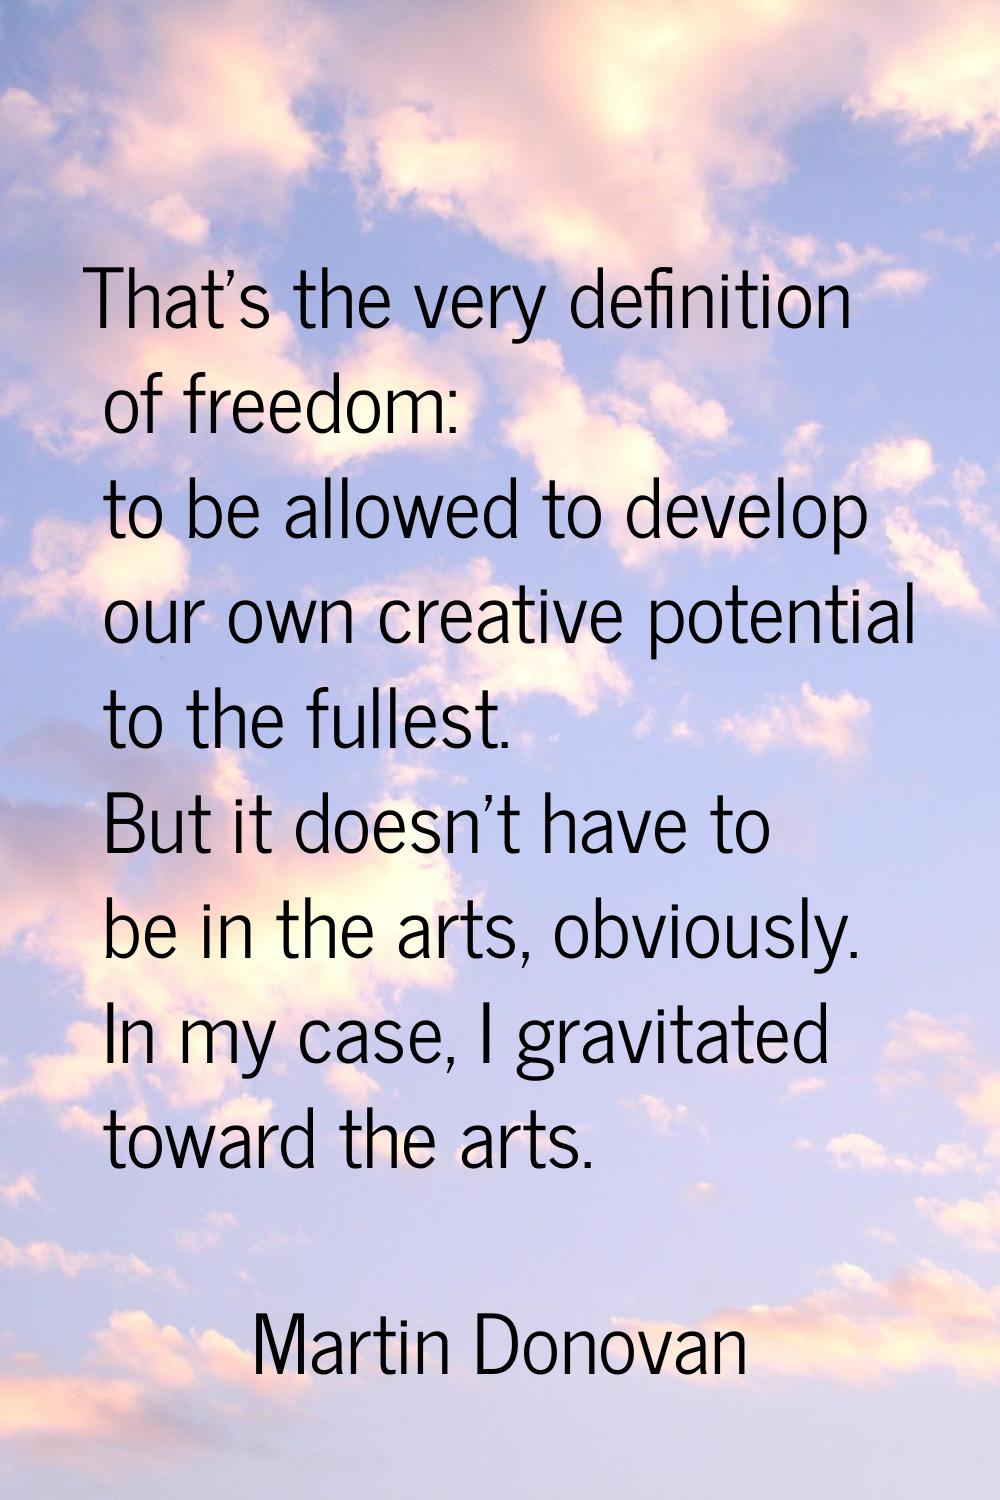 That's the very definition of freedom: to be allowed to develop our own creative potential to the f